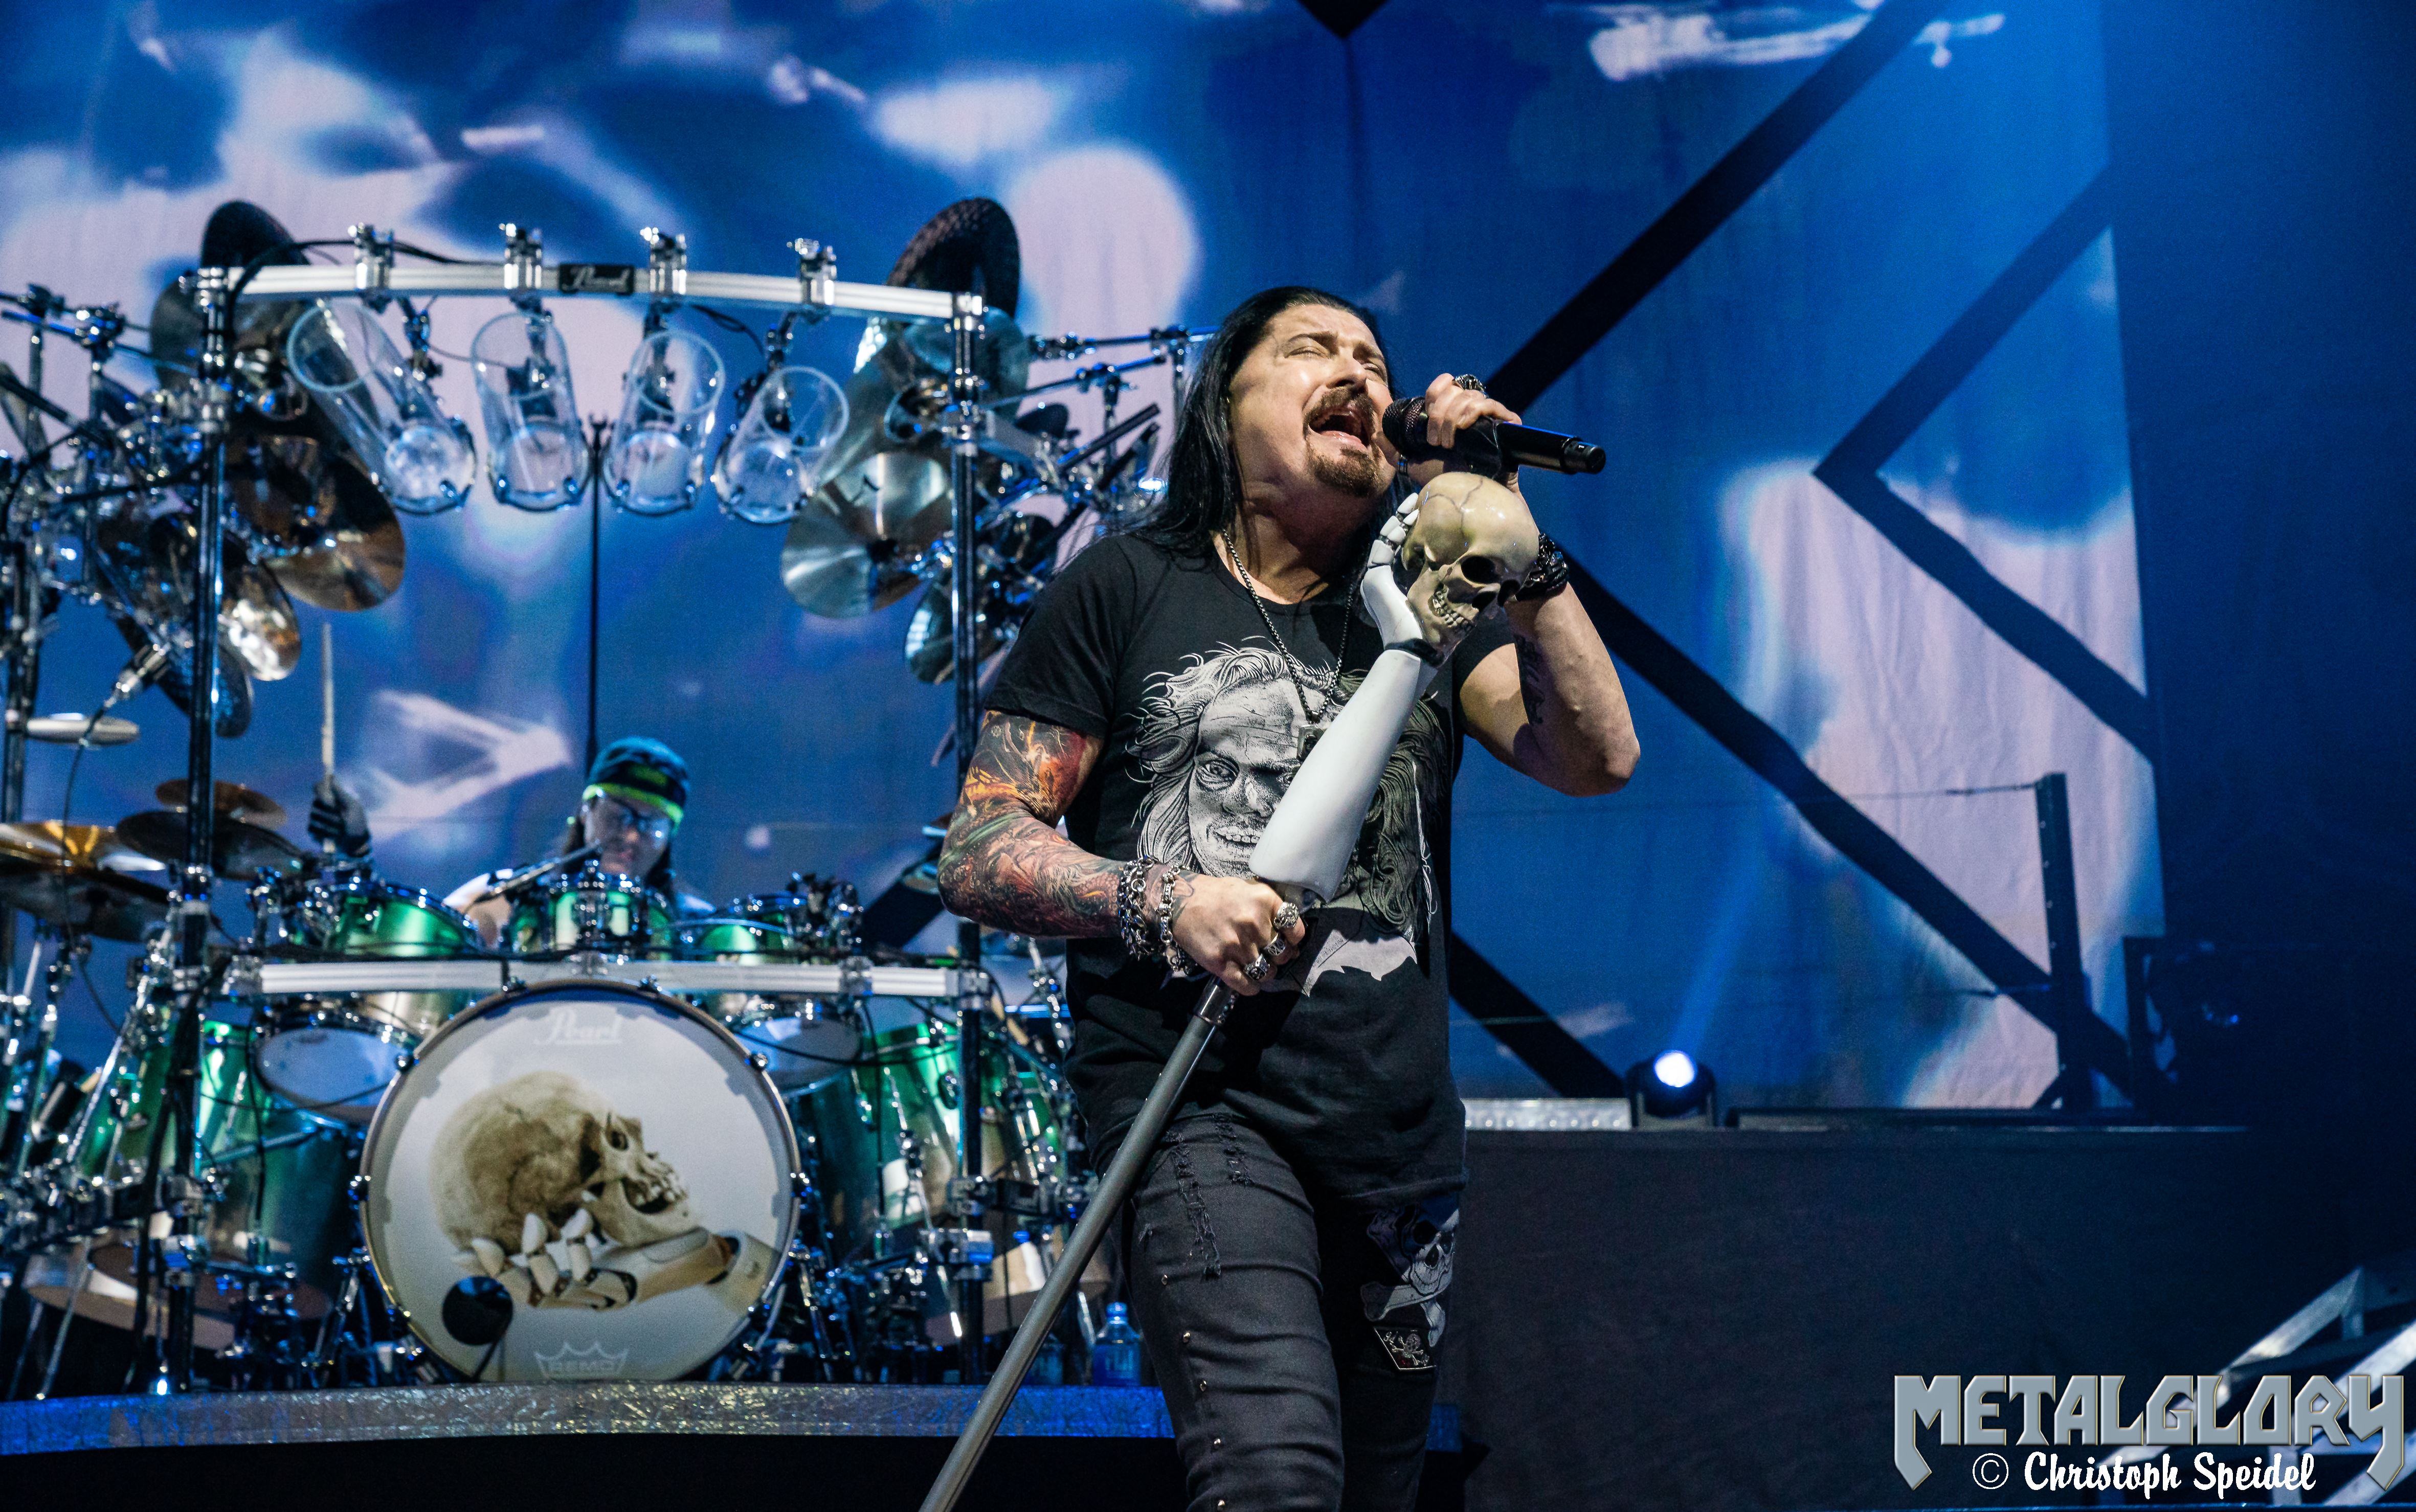 Dream Theater “Distance Over Time Tour 2020”, 18.02.2020, Swiss Life Hall, Hannover